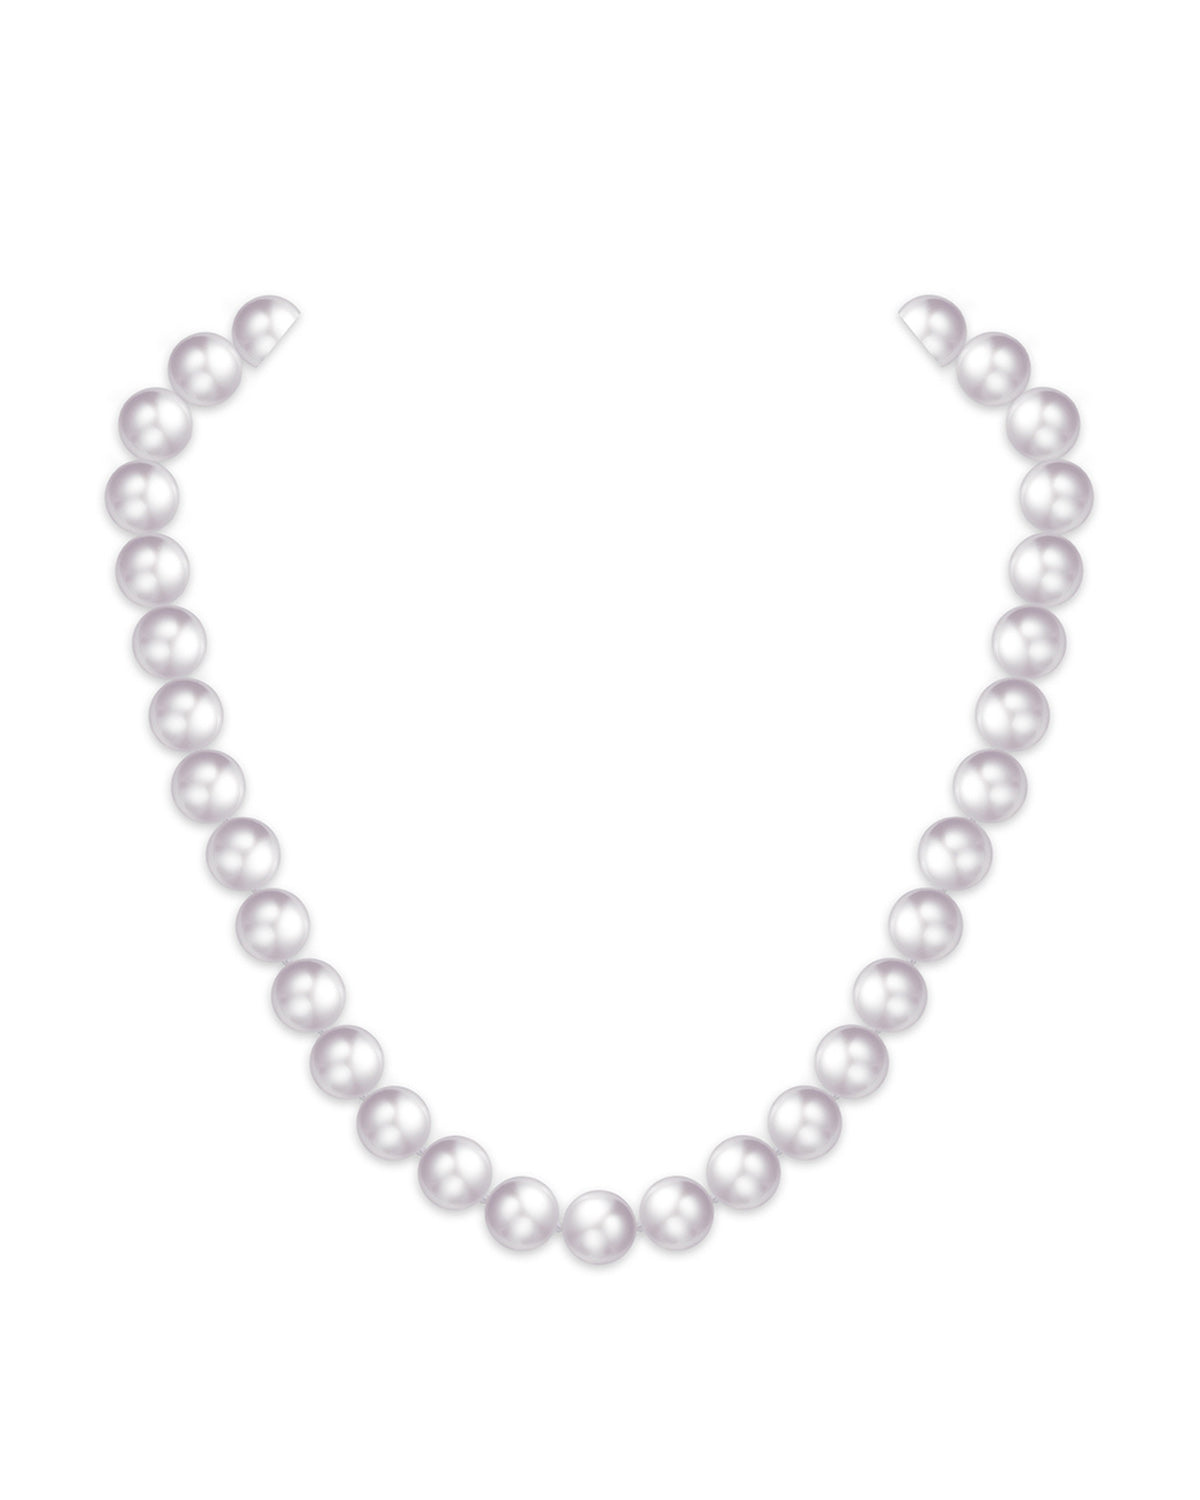 10-11mm White Freshwater Round Pearl Necklace - AAA Quality